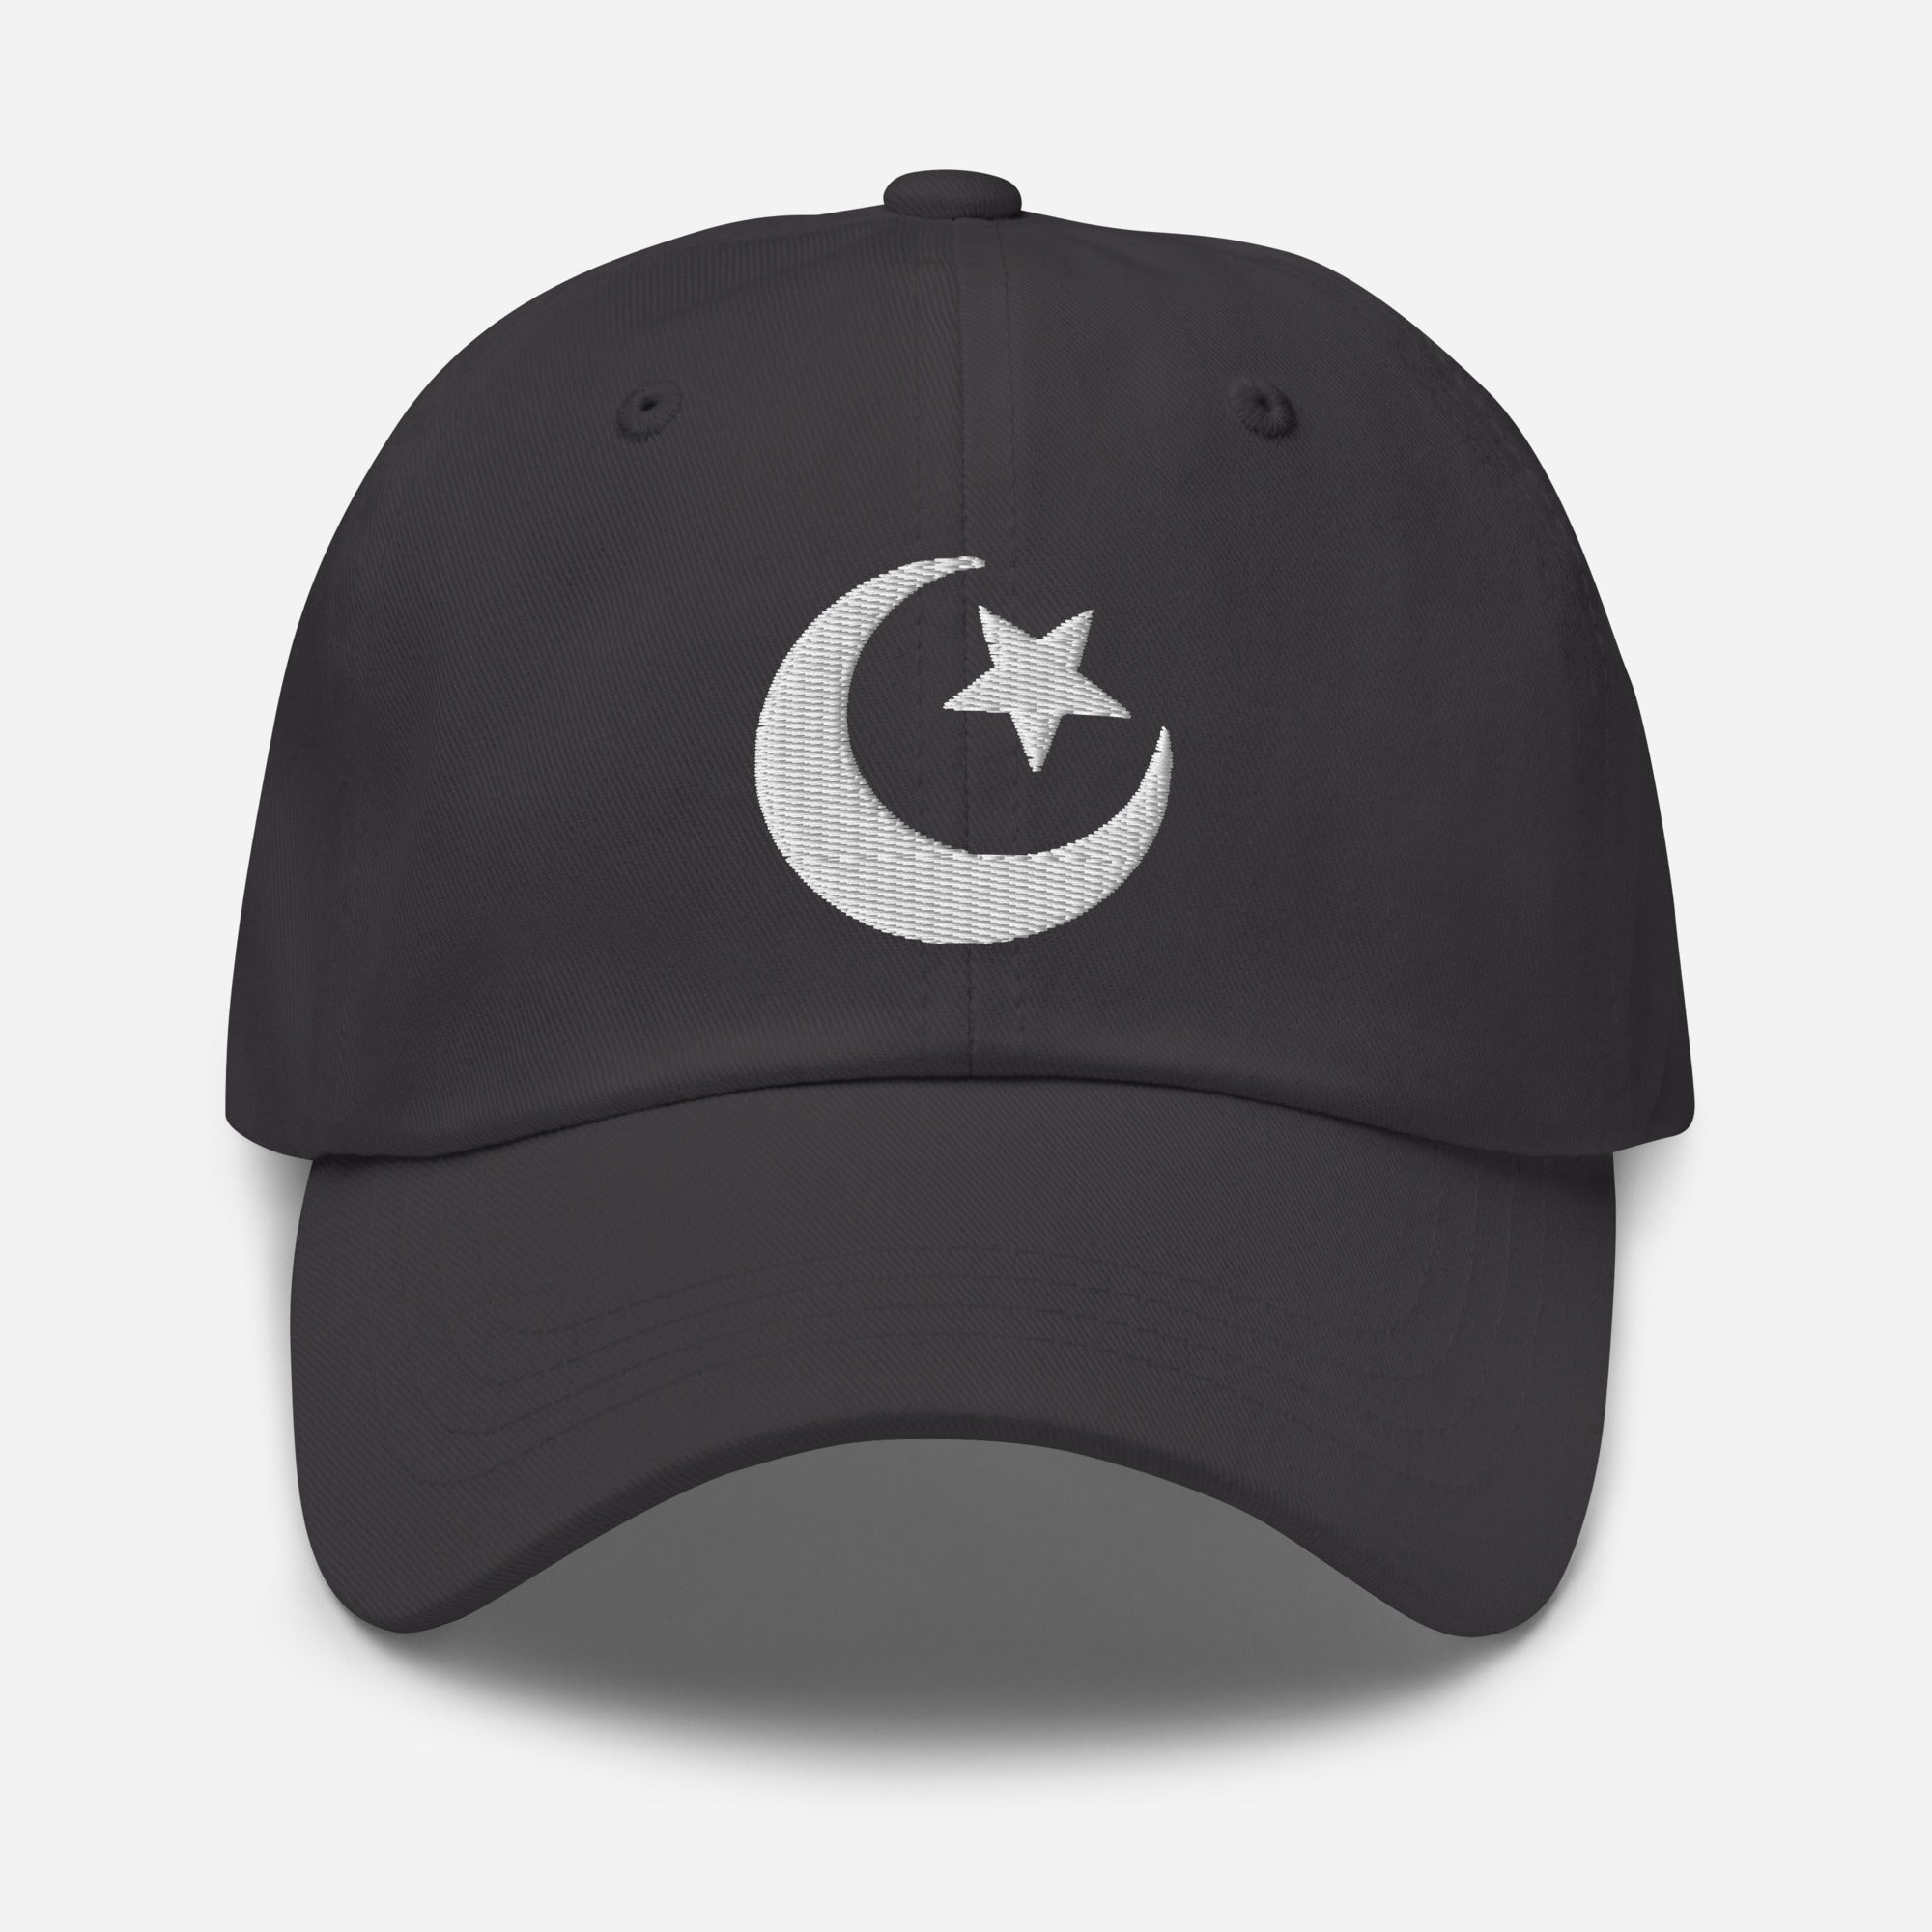 Star and Crescent Moon Ancient Symbol Embroidered Baseball Cap Dad hat